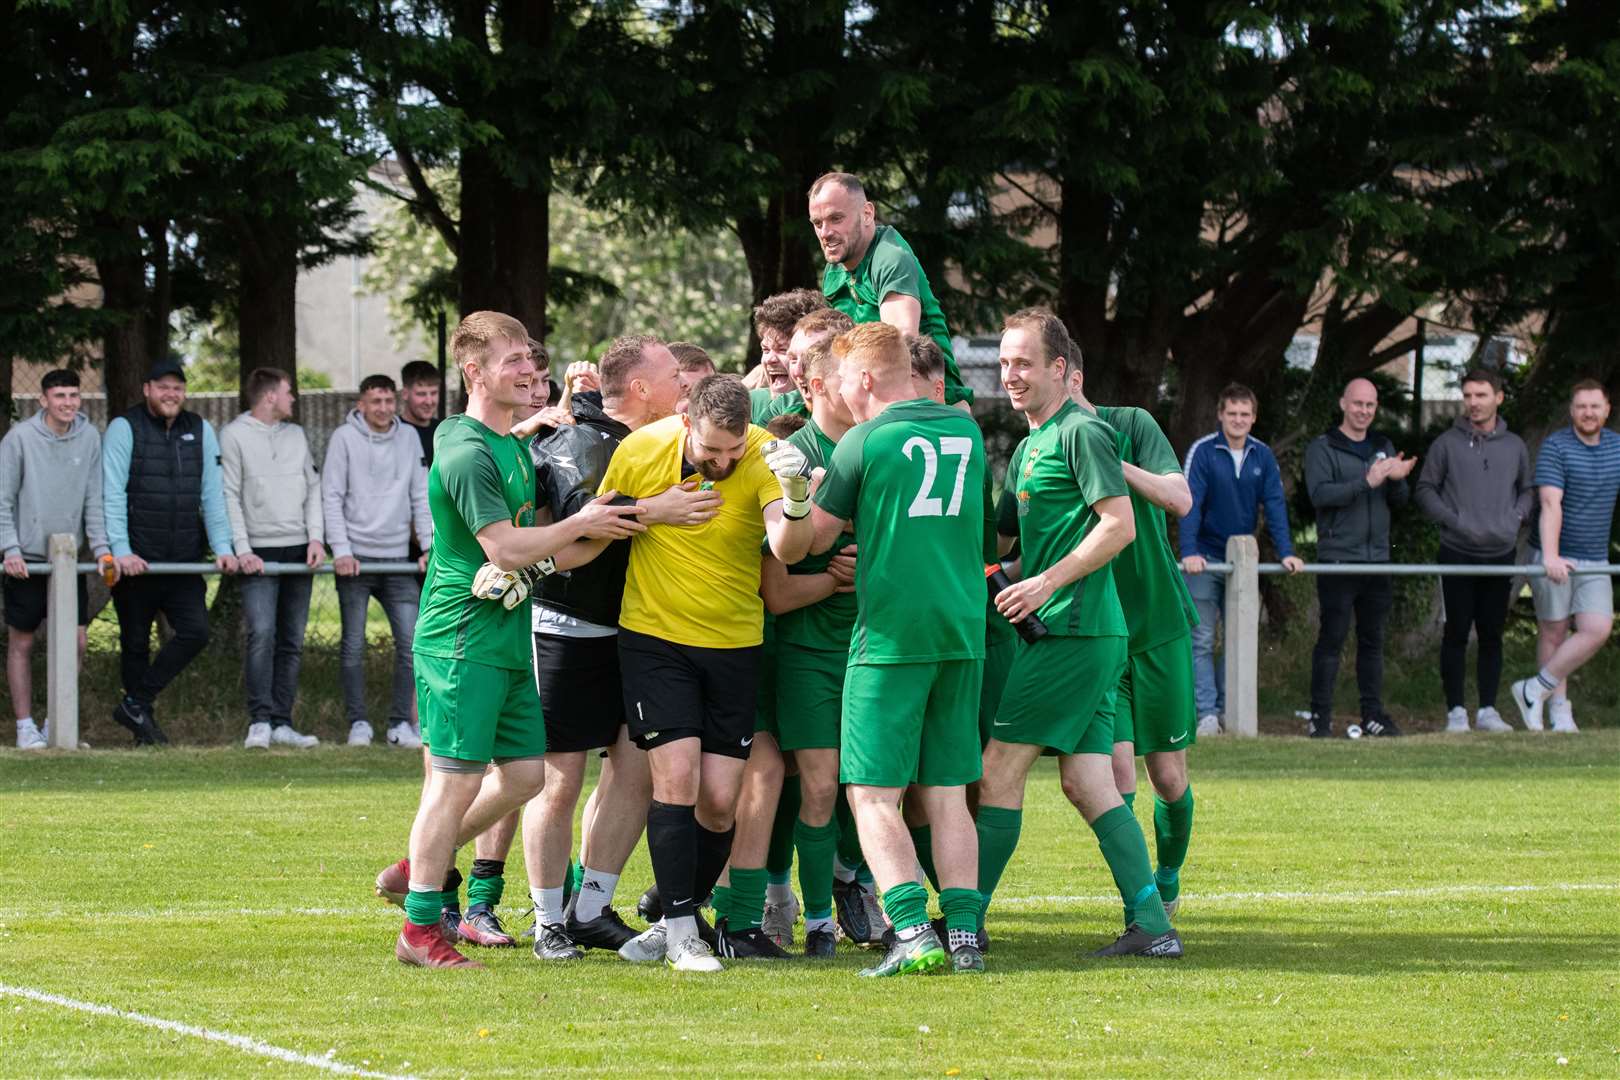 Dufftown celebrate their cup success...Dufftown FC (2) vs Forres Thistle FC (2) - Dufftown FC win 5-3 on penalties - Elginshire Cup Final held at Logie Park, Forres 14/05/2022...Picture: Daniel Forsyth..